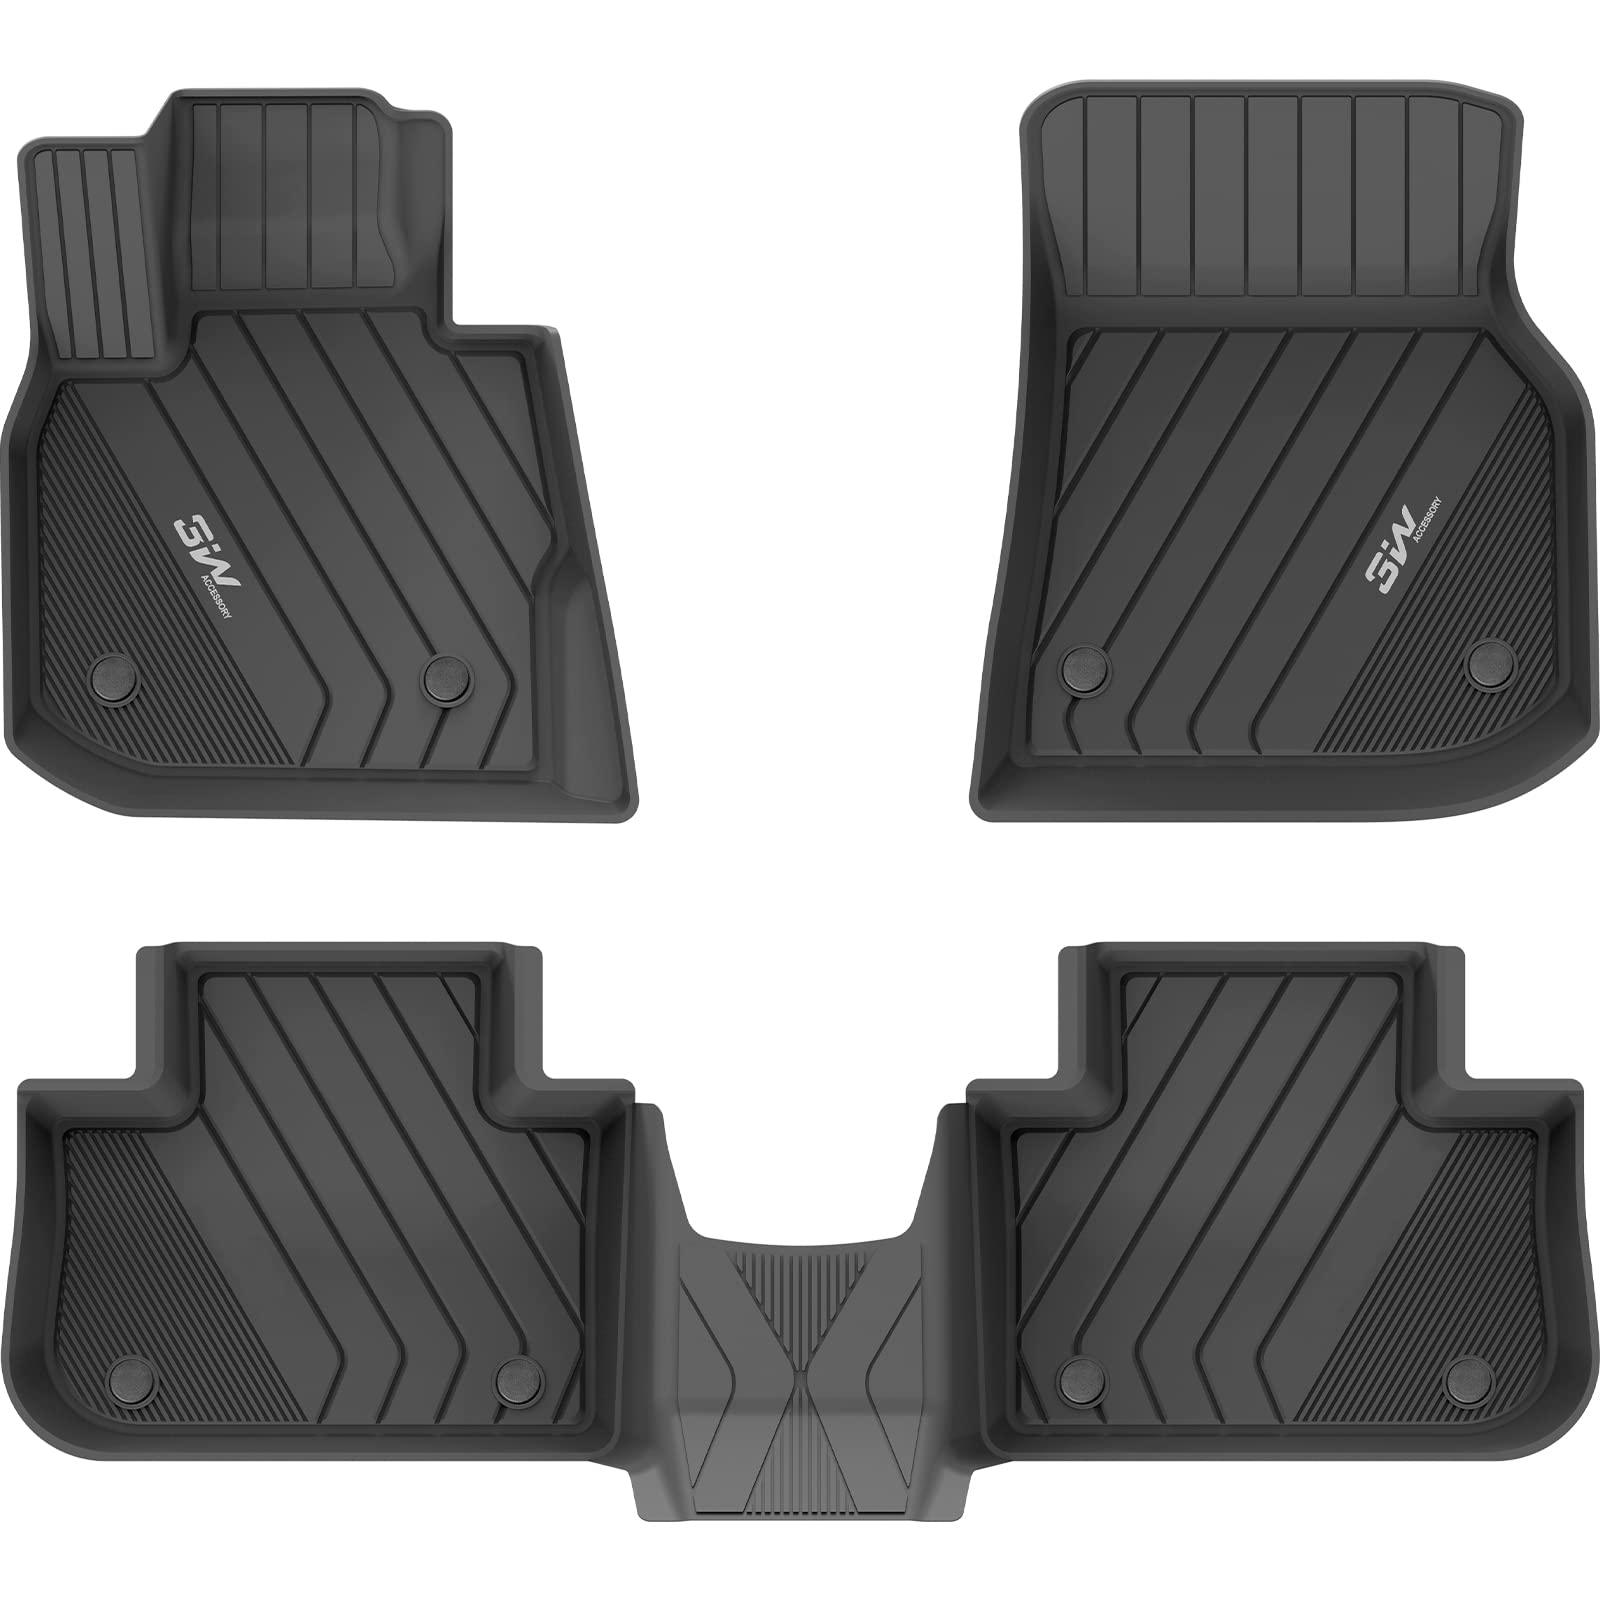 3W BMW X3 30i X3 M40i X3 30e X3 M 2018-2024 Floor Mats & Cargo Mats TPE Material & All-Weather Protection Vehicles & Parts 3Wliners 2018-2024 X3 2018-2024 1st&2nd Row Mats